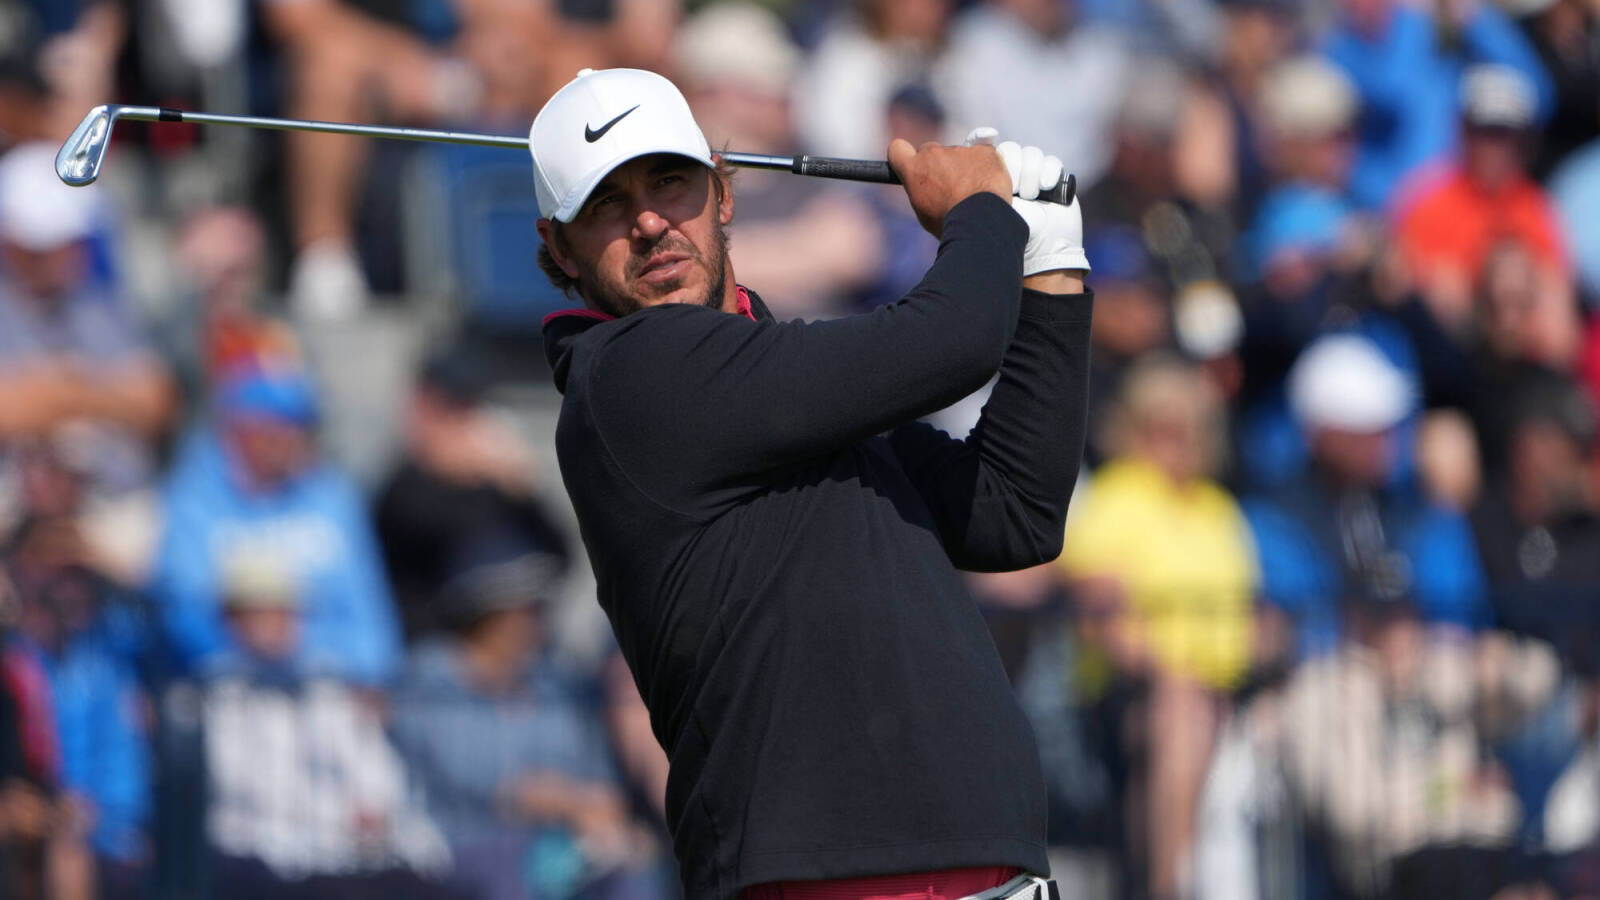 PGA Championship winner Brooks Koepka boosts Panthers for the